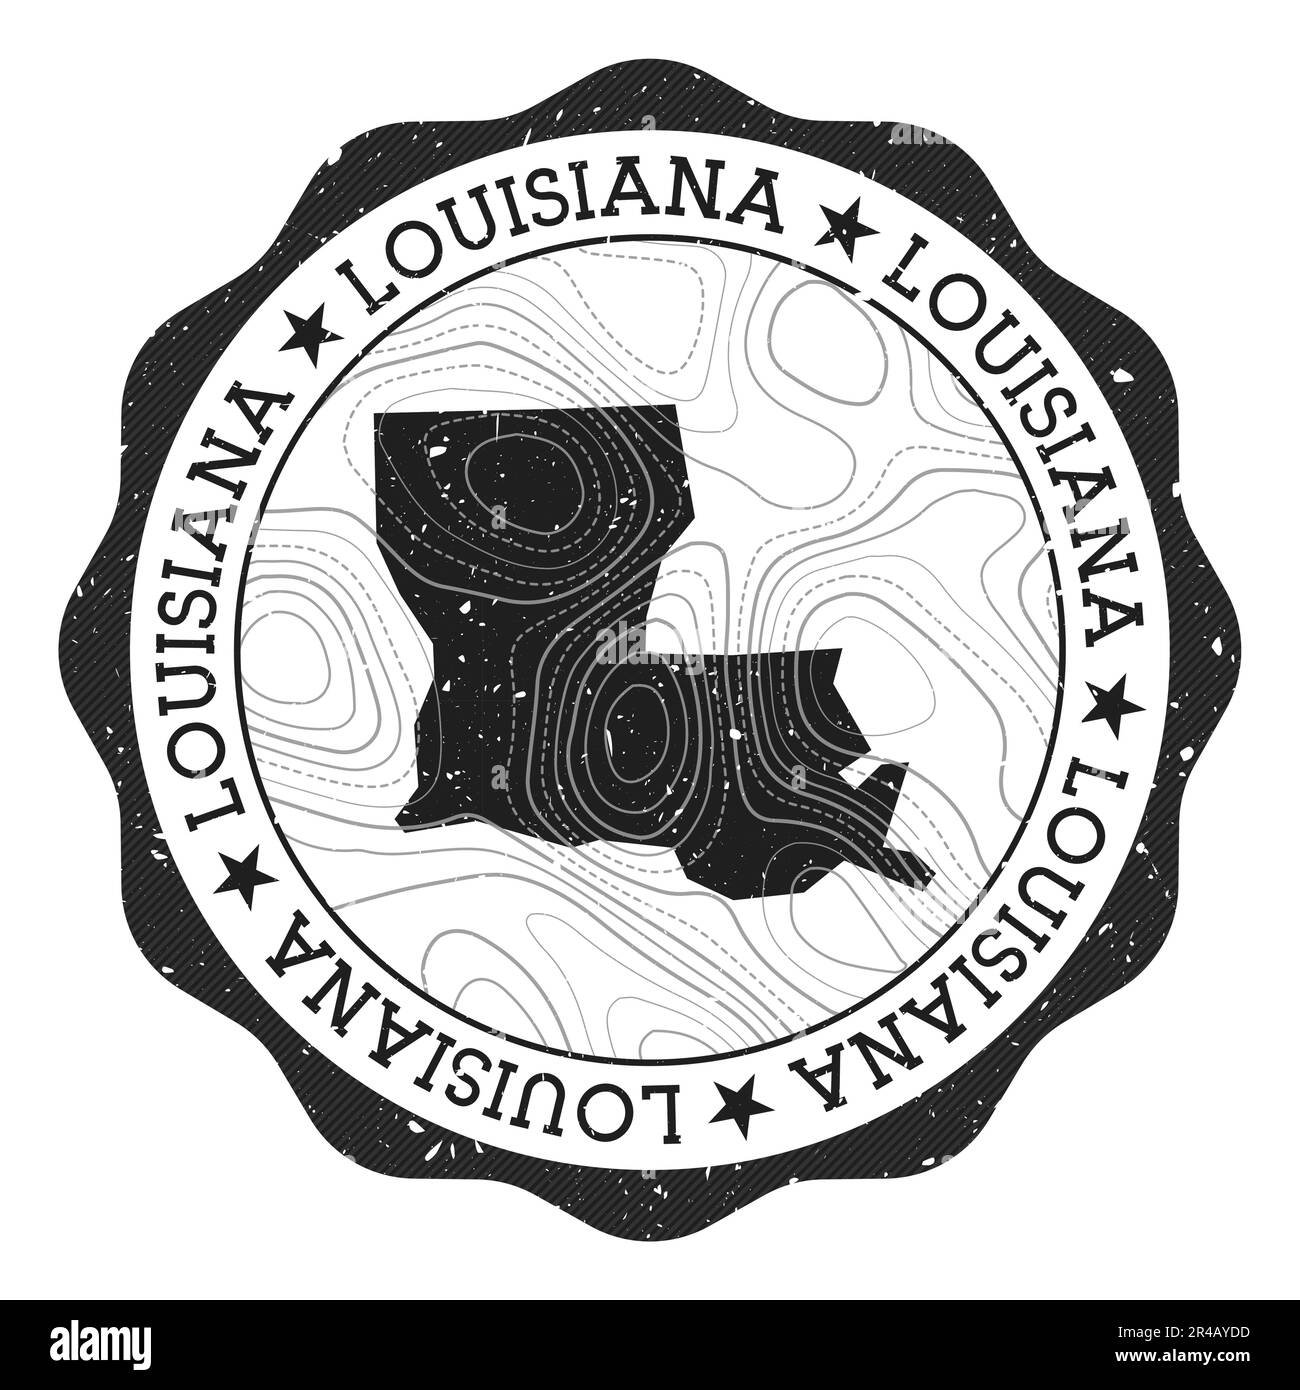 Louisiana outdoor stamp. Round sticker with map of us state with topographic isolines. Vector illustration. Can be used as insignia, logotype, label, Stock Vector